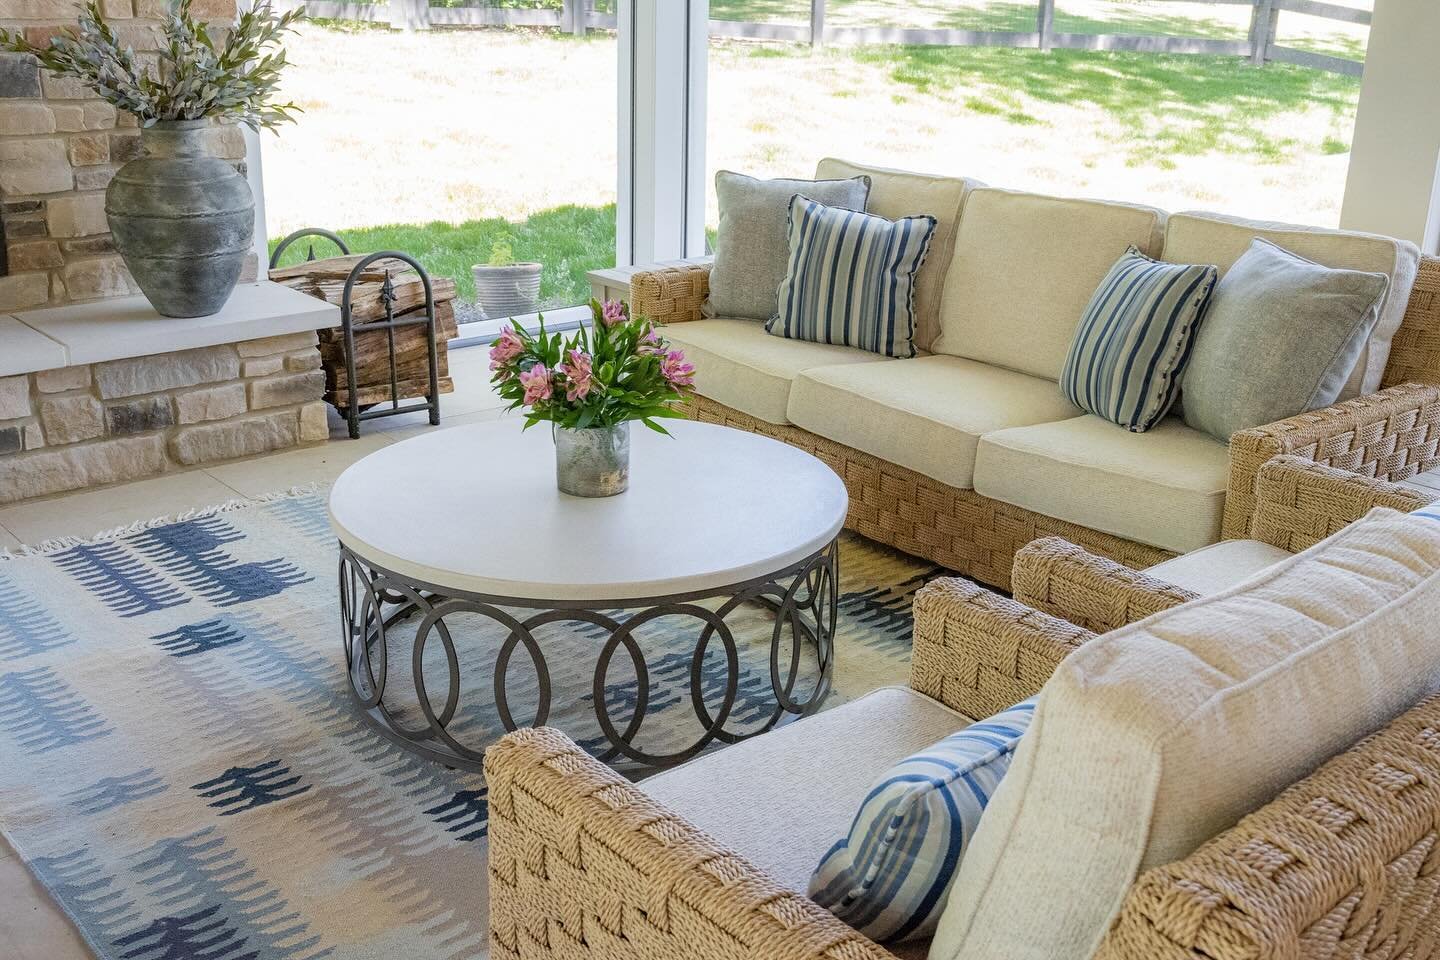 #BackyardEnvy&hellip; Sunny summer days are approaching and this client is ready for all of the outdoor entertaining! Obsessed with these @kingsley_bate patio chairs with an Abaca rope basket weave texture. #OutdoorLiving @summerclassics @jaipurlivin